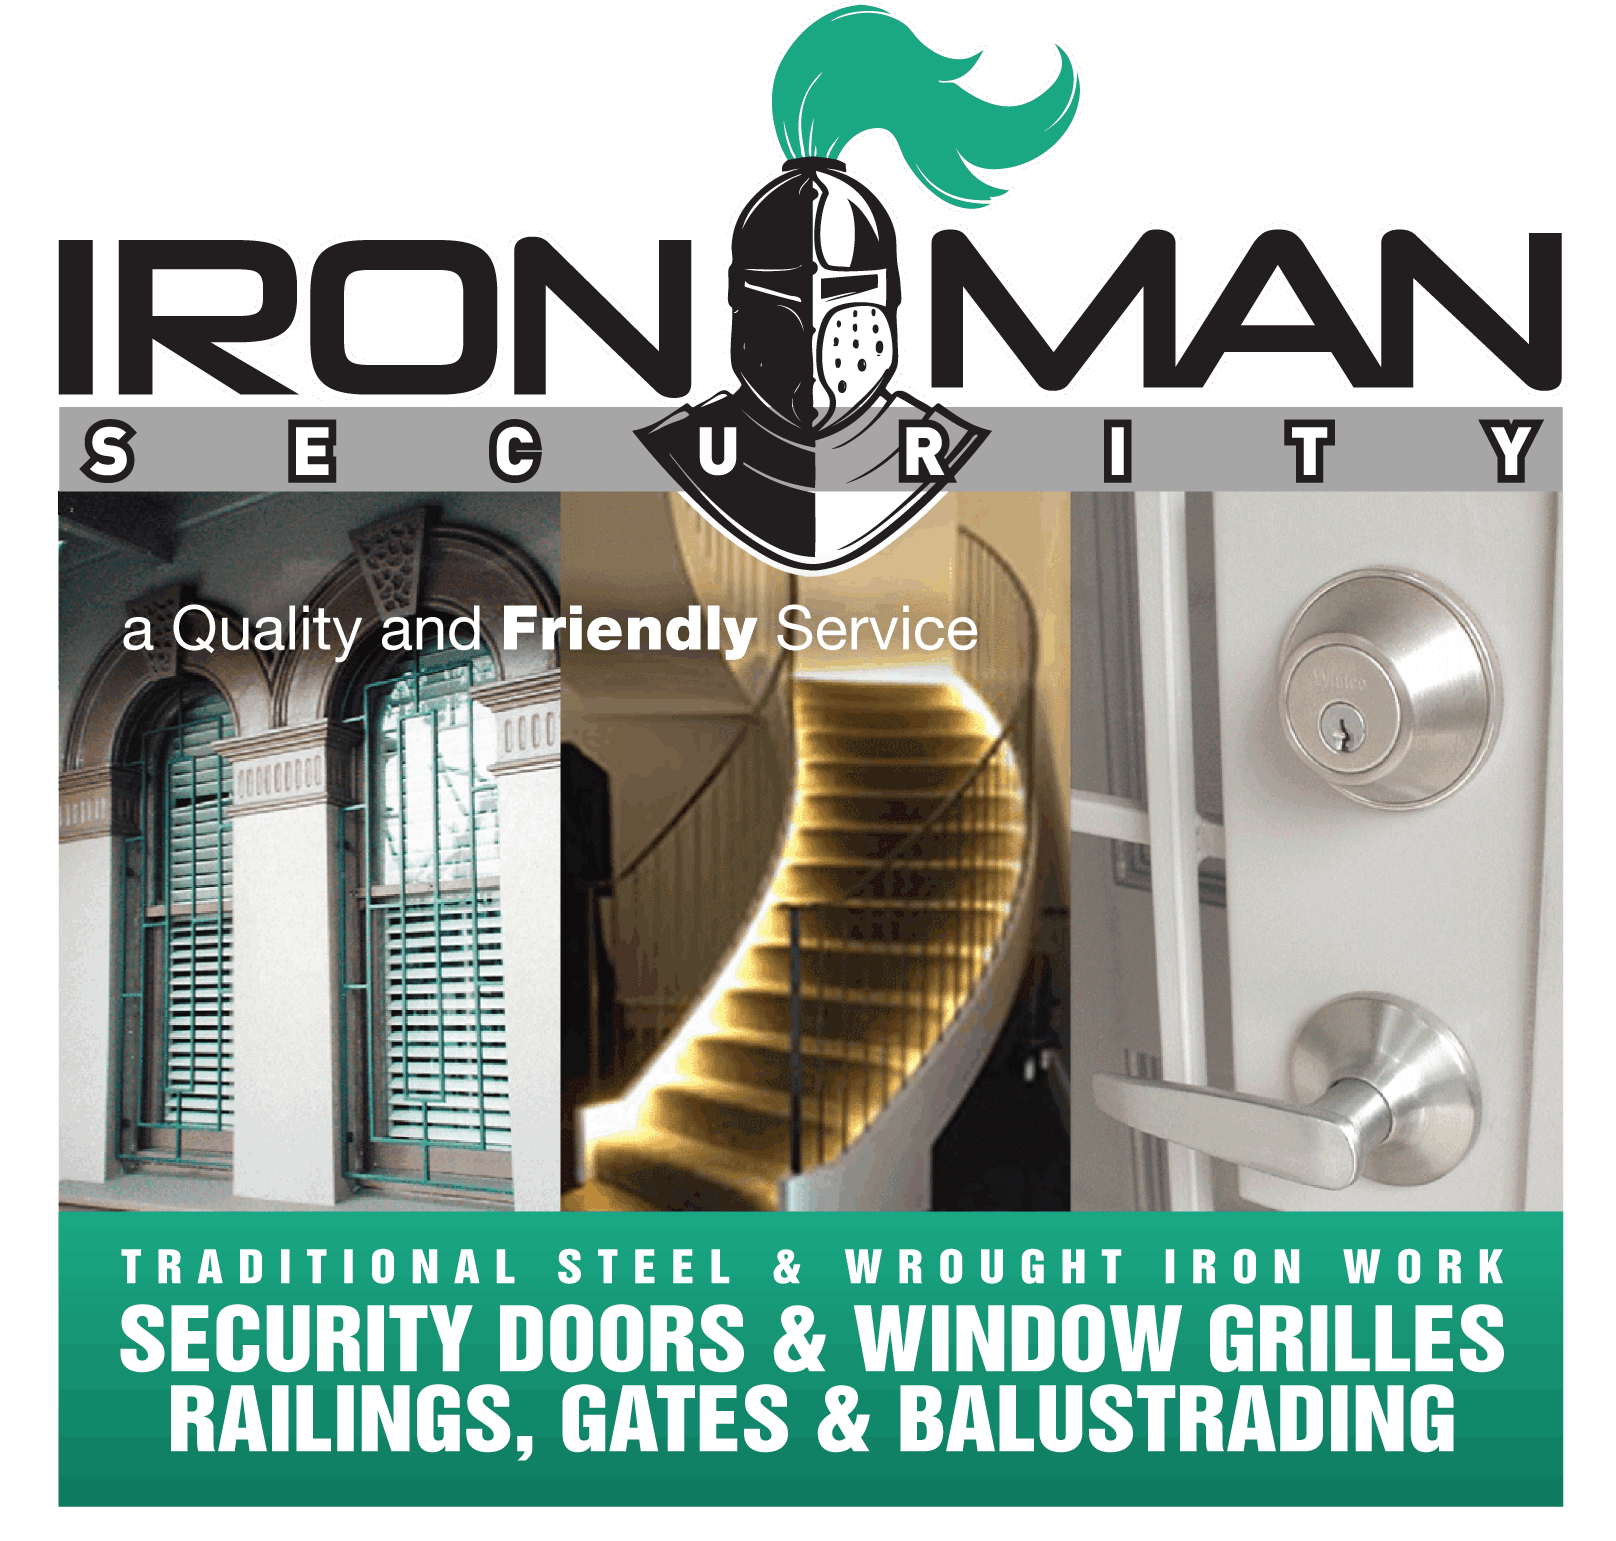 Ironman Security off the best Steel Security Doors, Window Grilles, Balustrading, Gates and Railings in Sydney